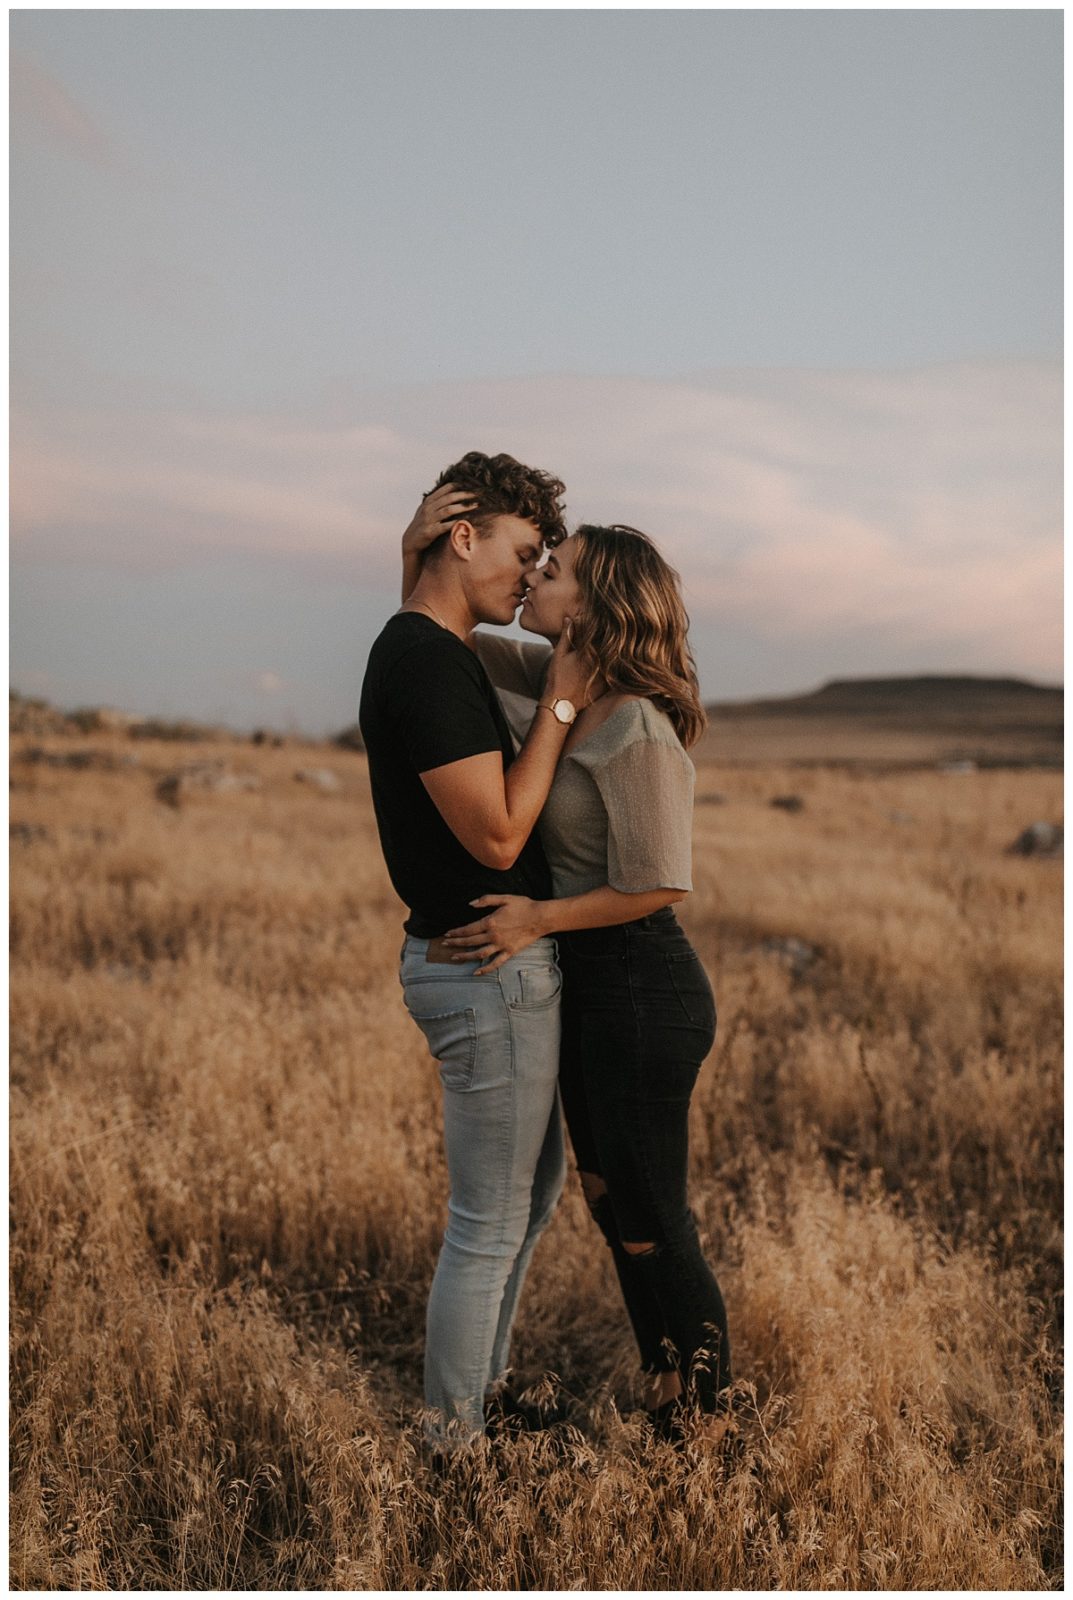 Sun Drenched Love Sesh at Antelope Island | autumnnicolephoto.com